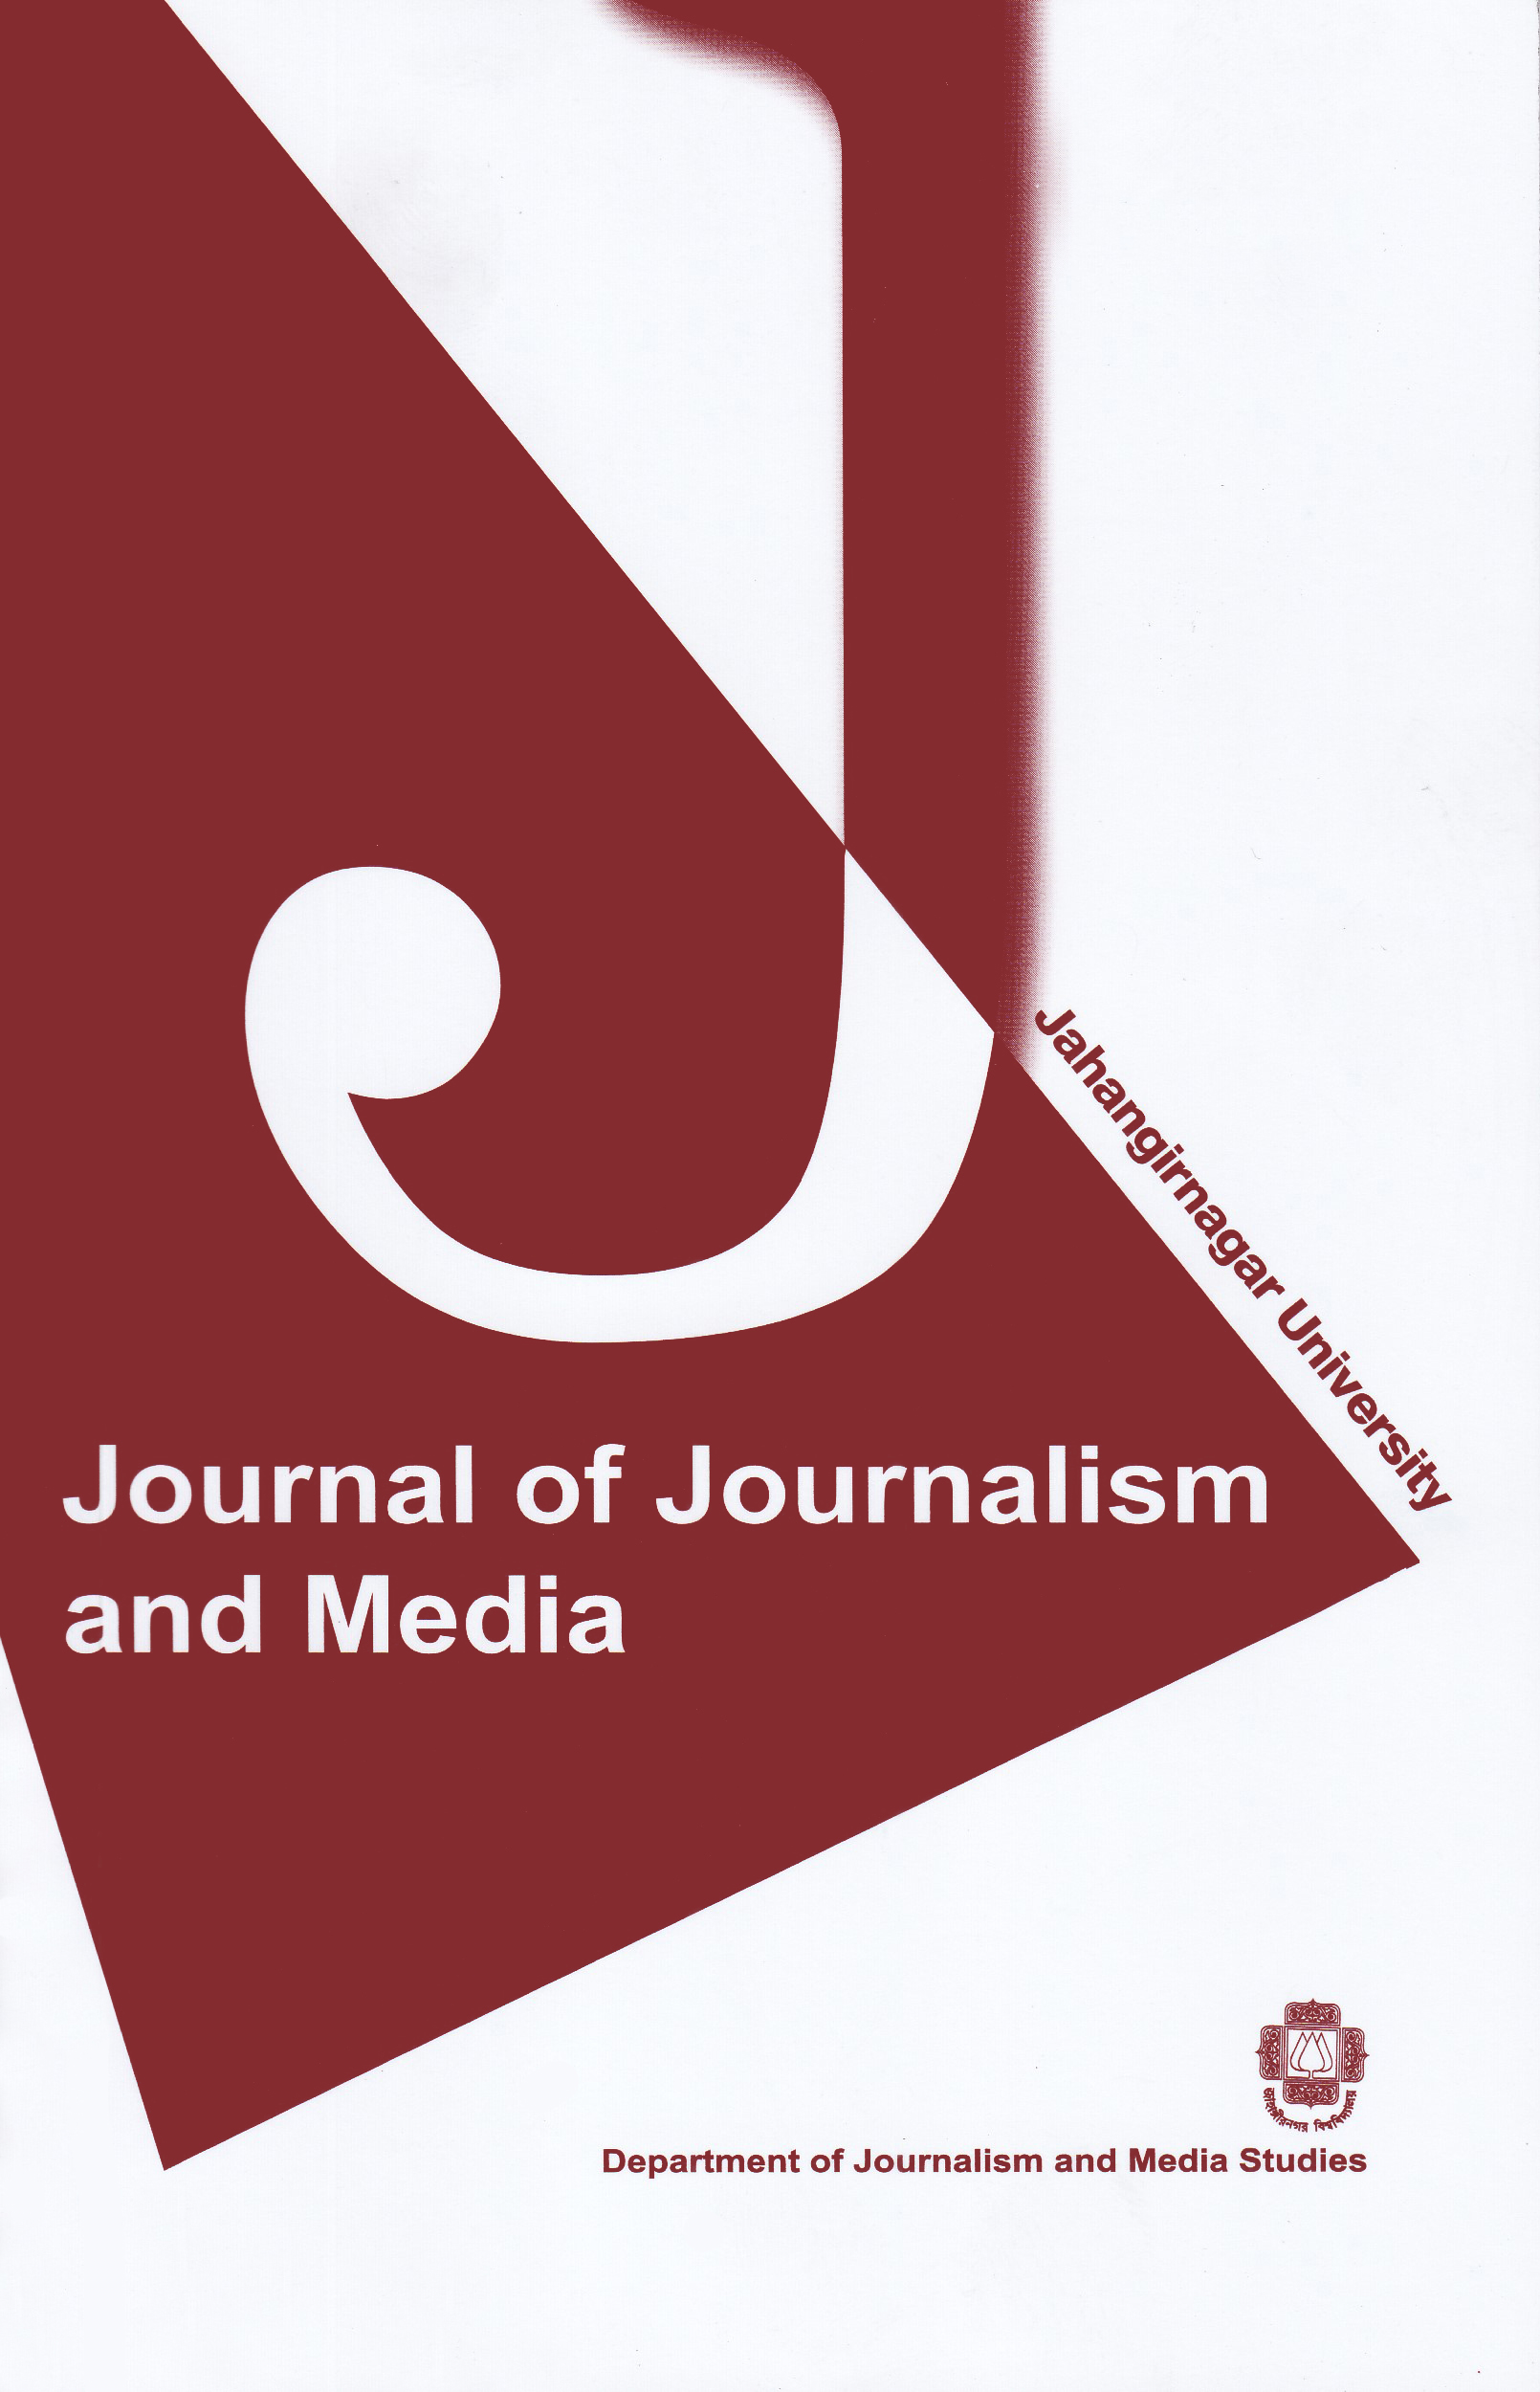 Journal of Journalism and Media Cover page